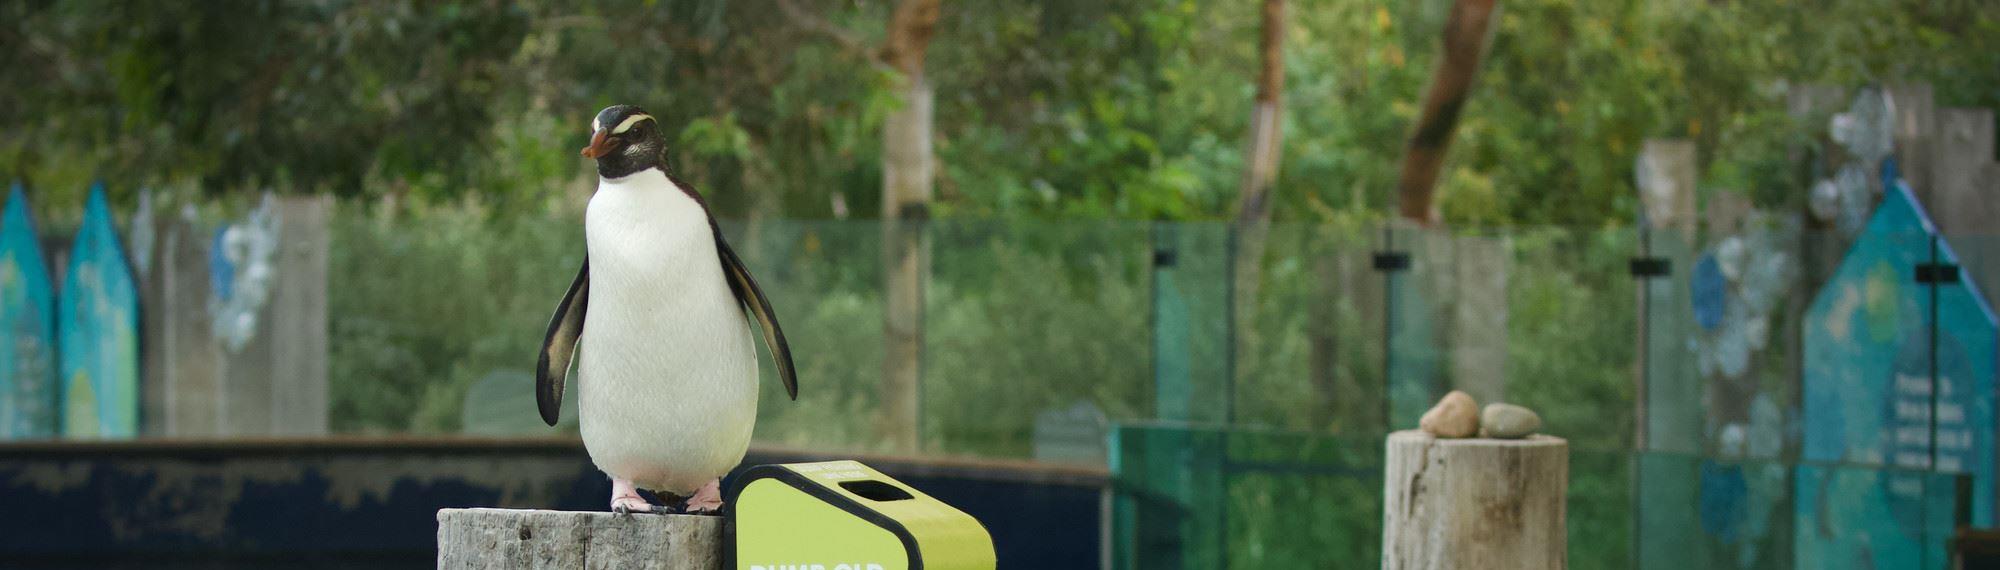 A Fiordland Penguin standing on a post next to a Seal the Loop bin at Melbourne Zoo.